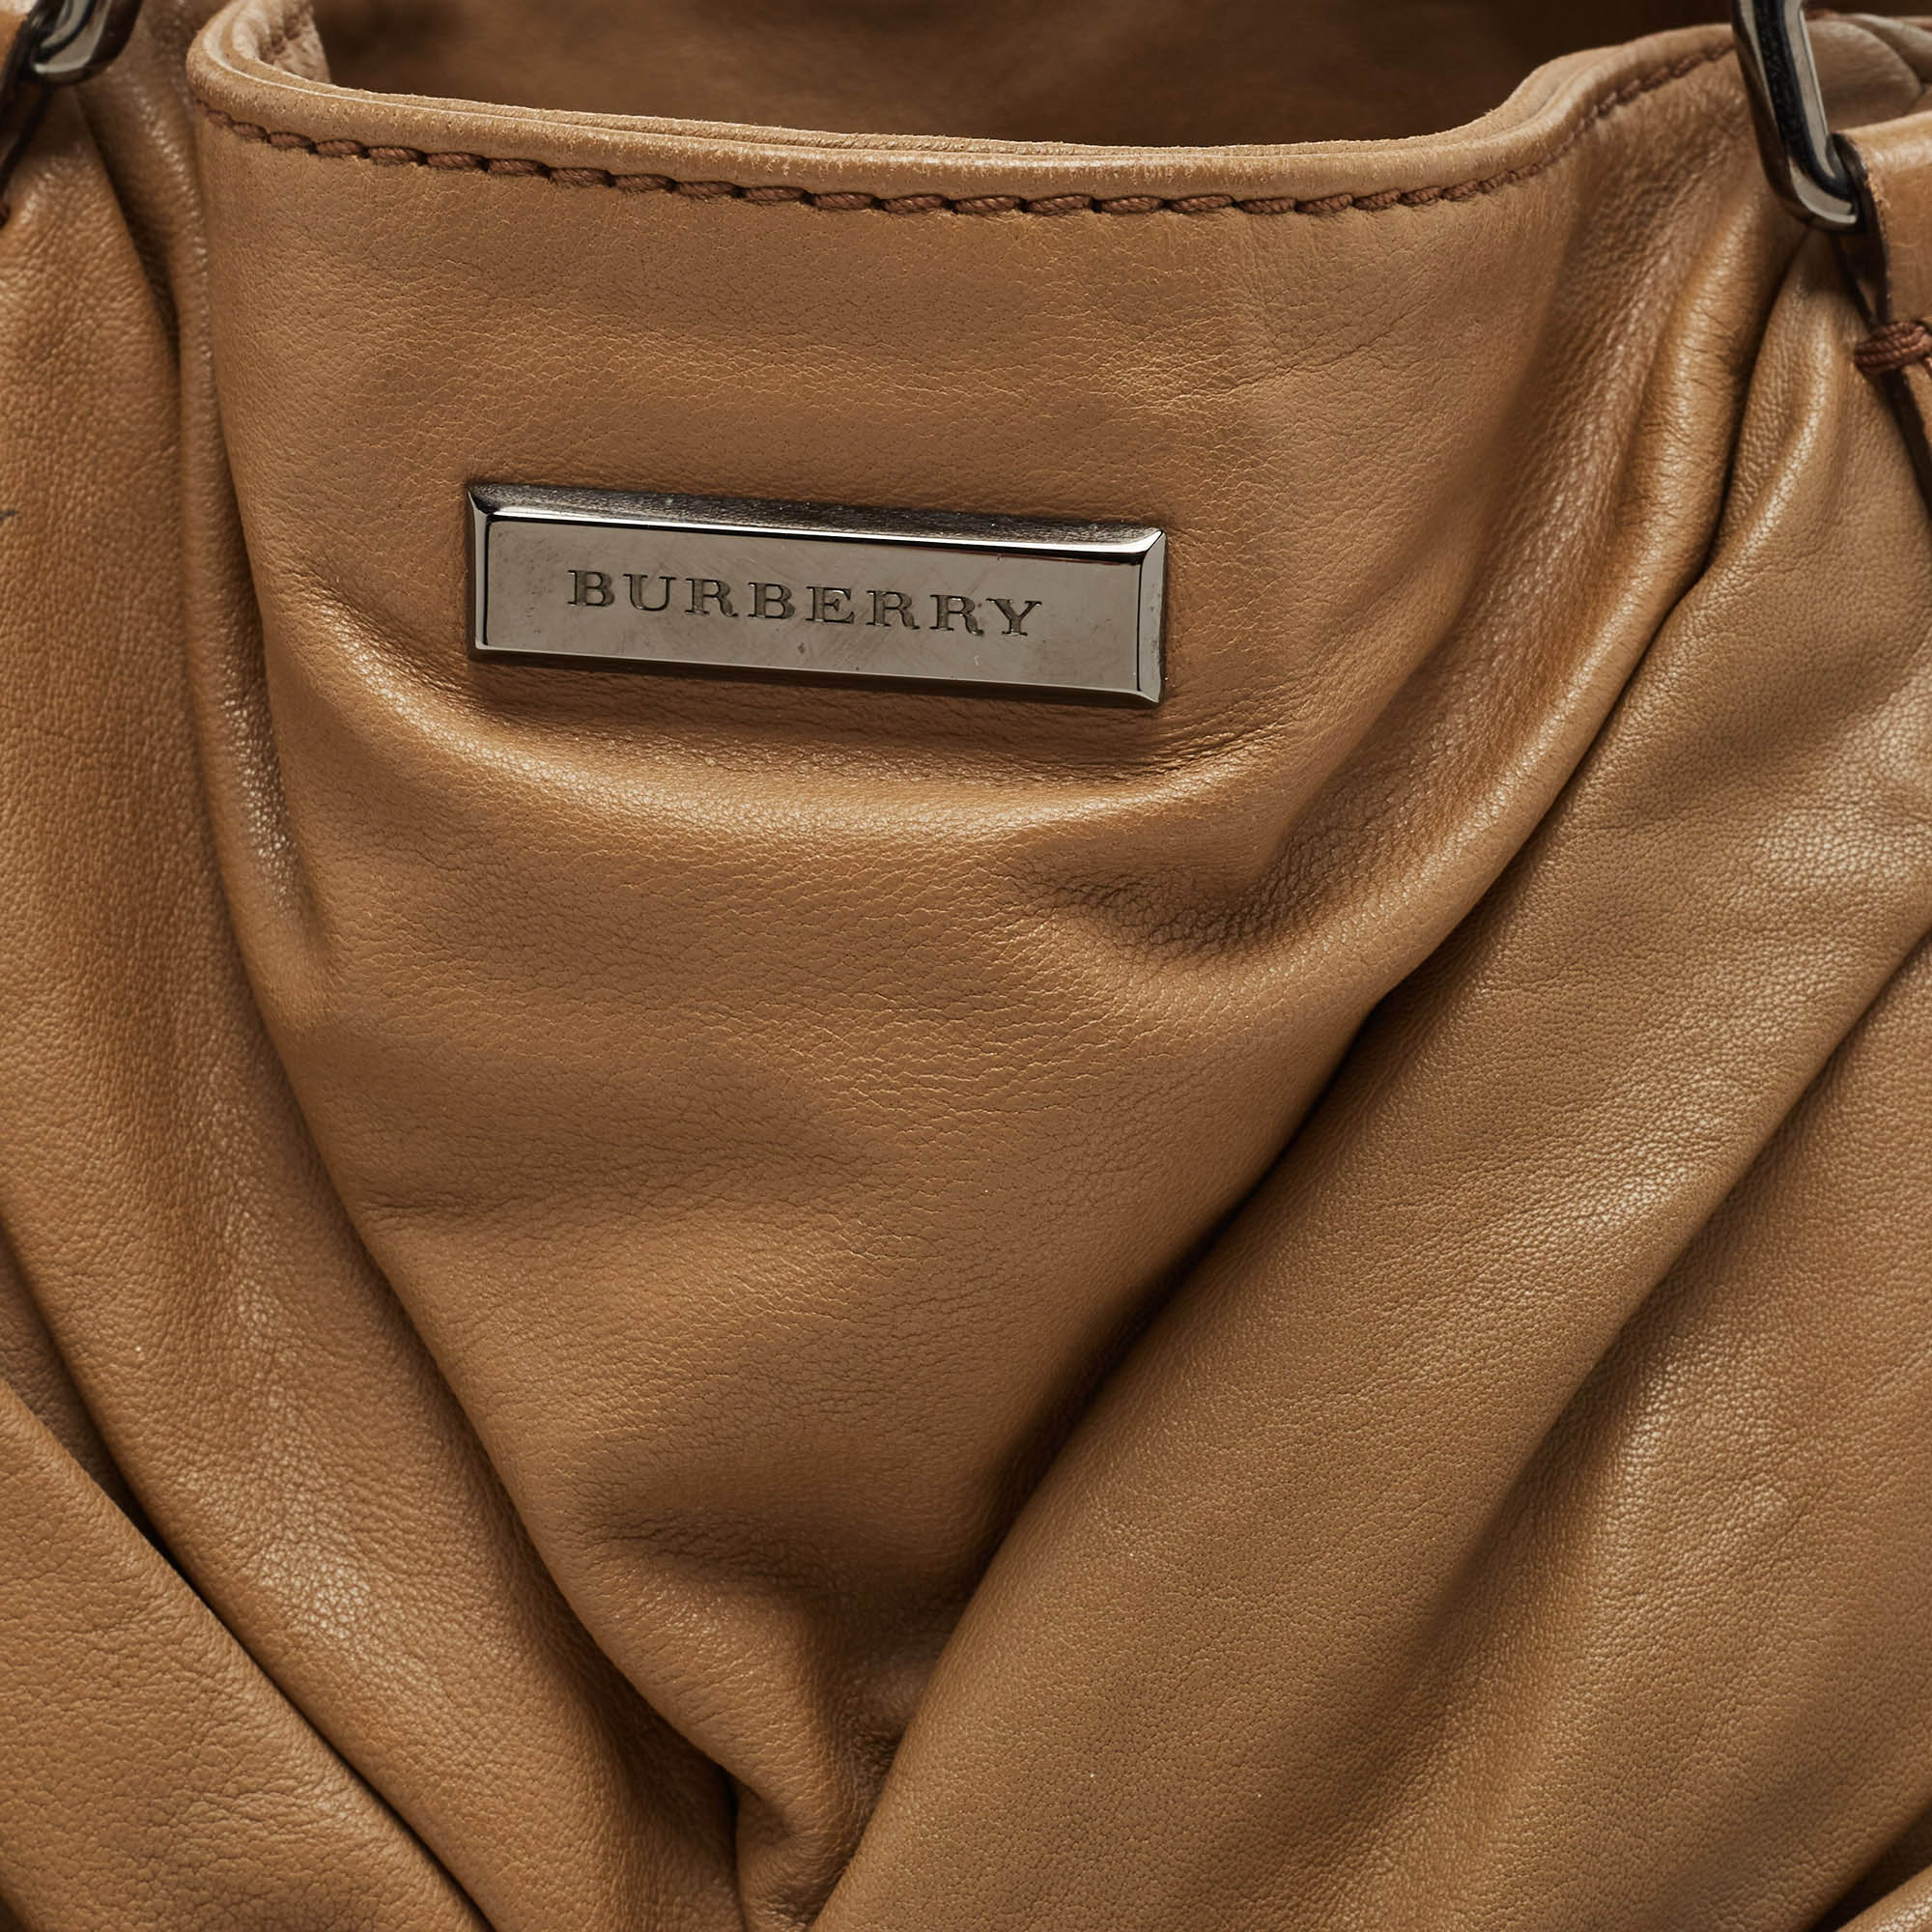 Burberry Tan Pleated Leather Tote